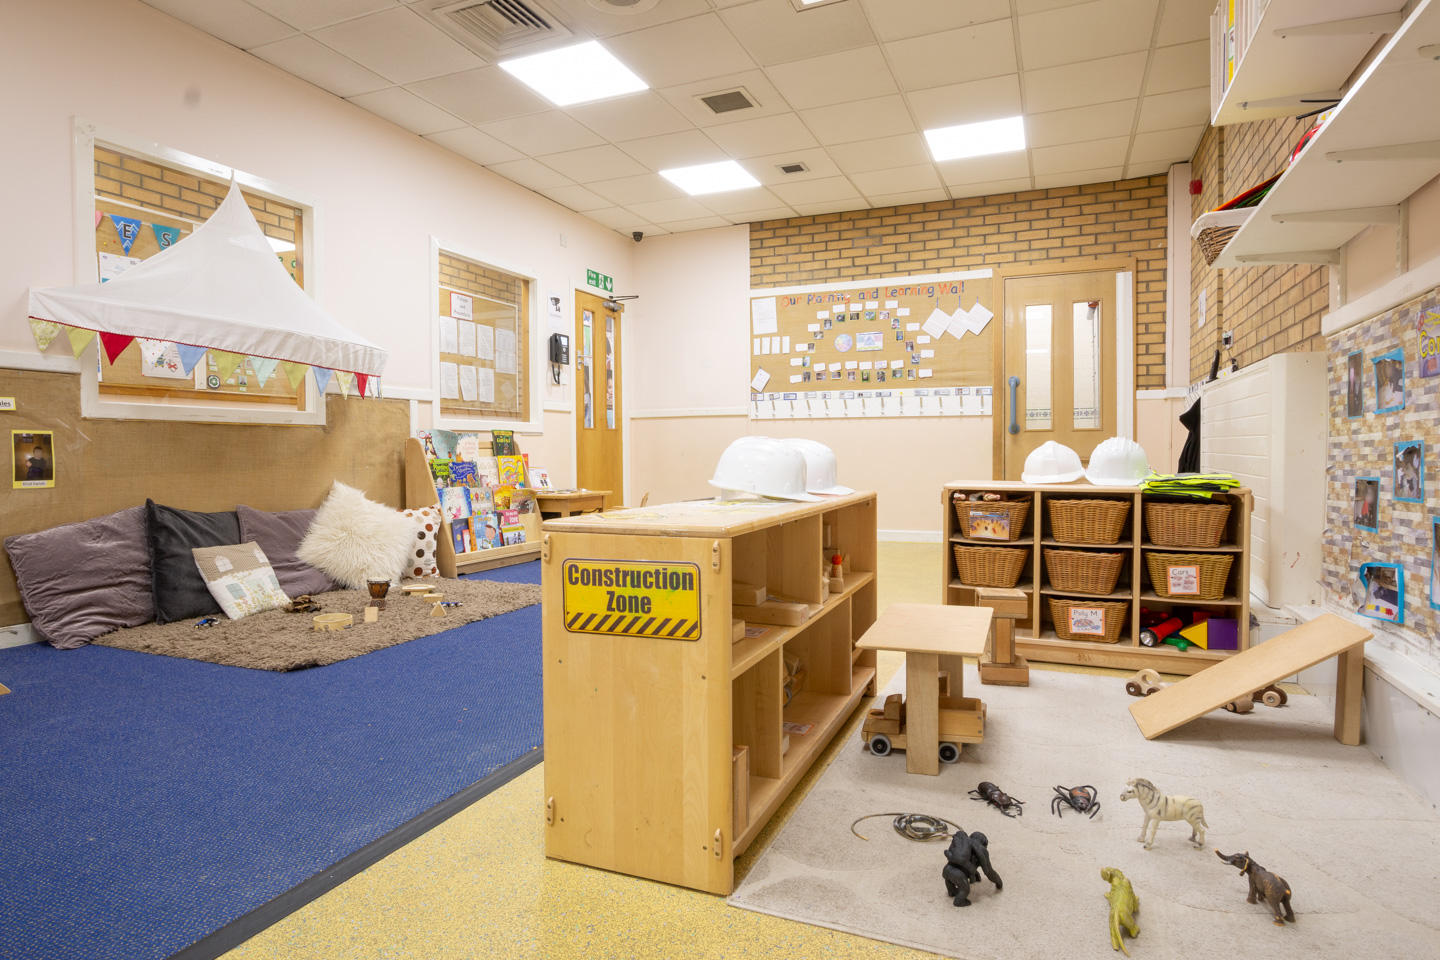 Images Bright Horizons Renfrew Early Learning and Childcare